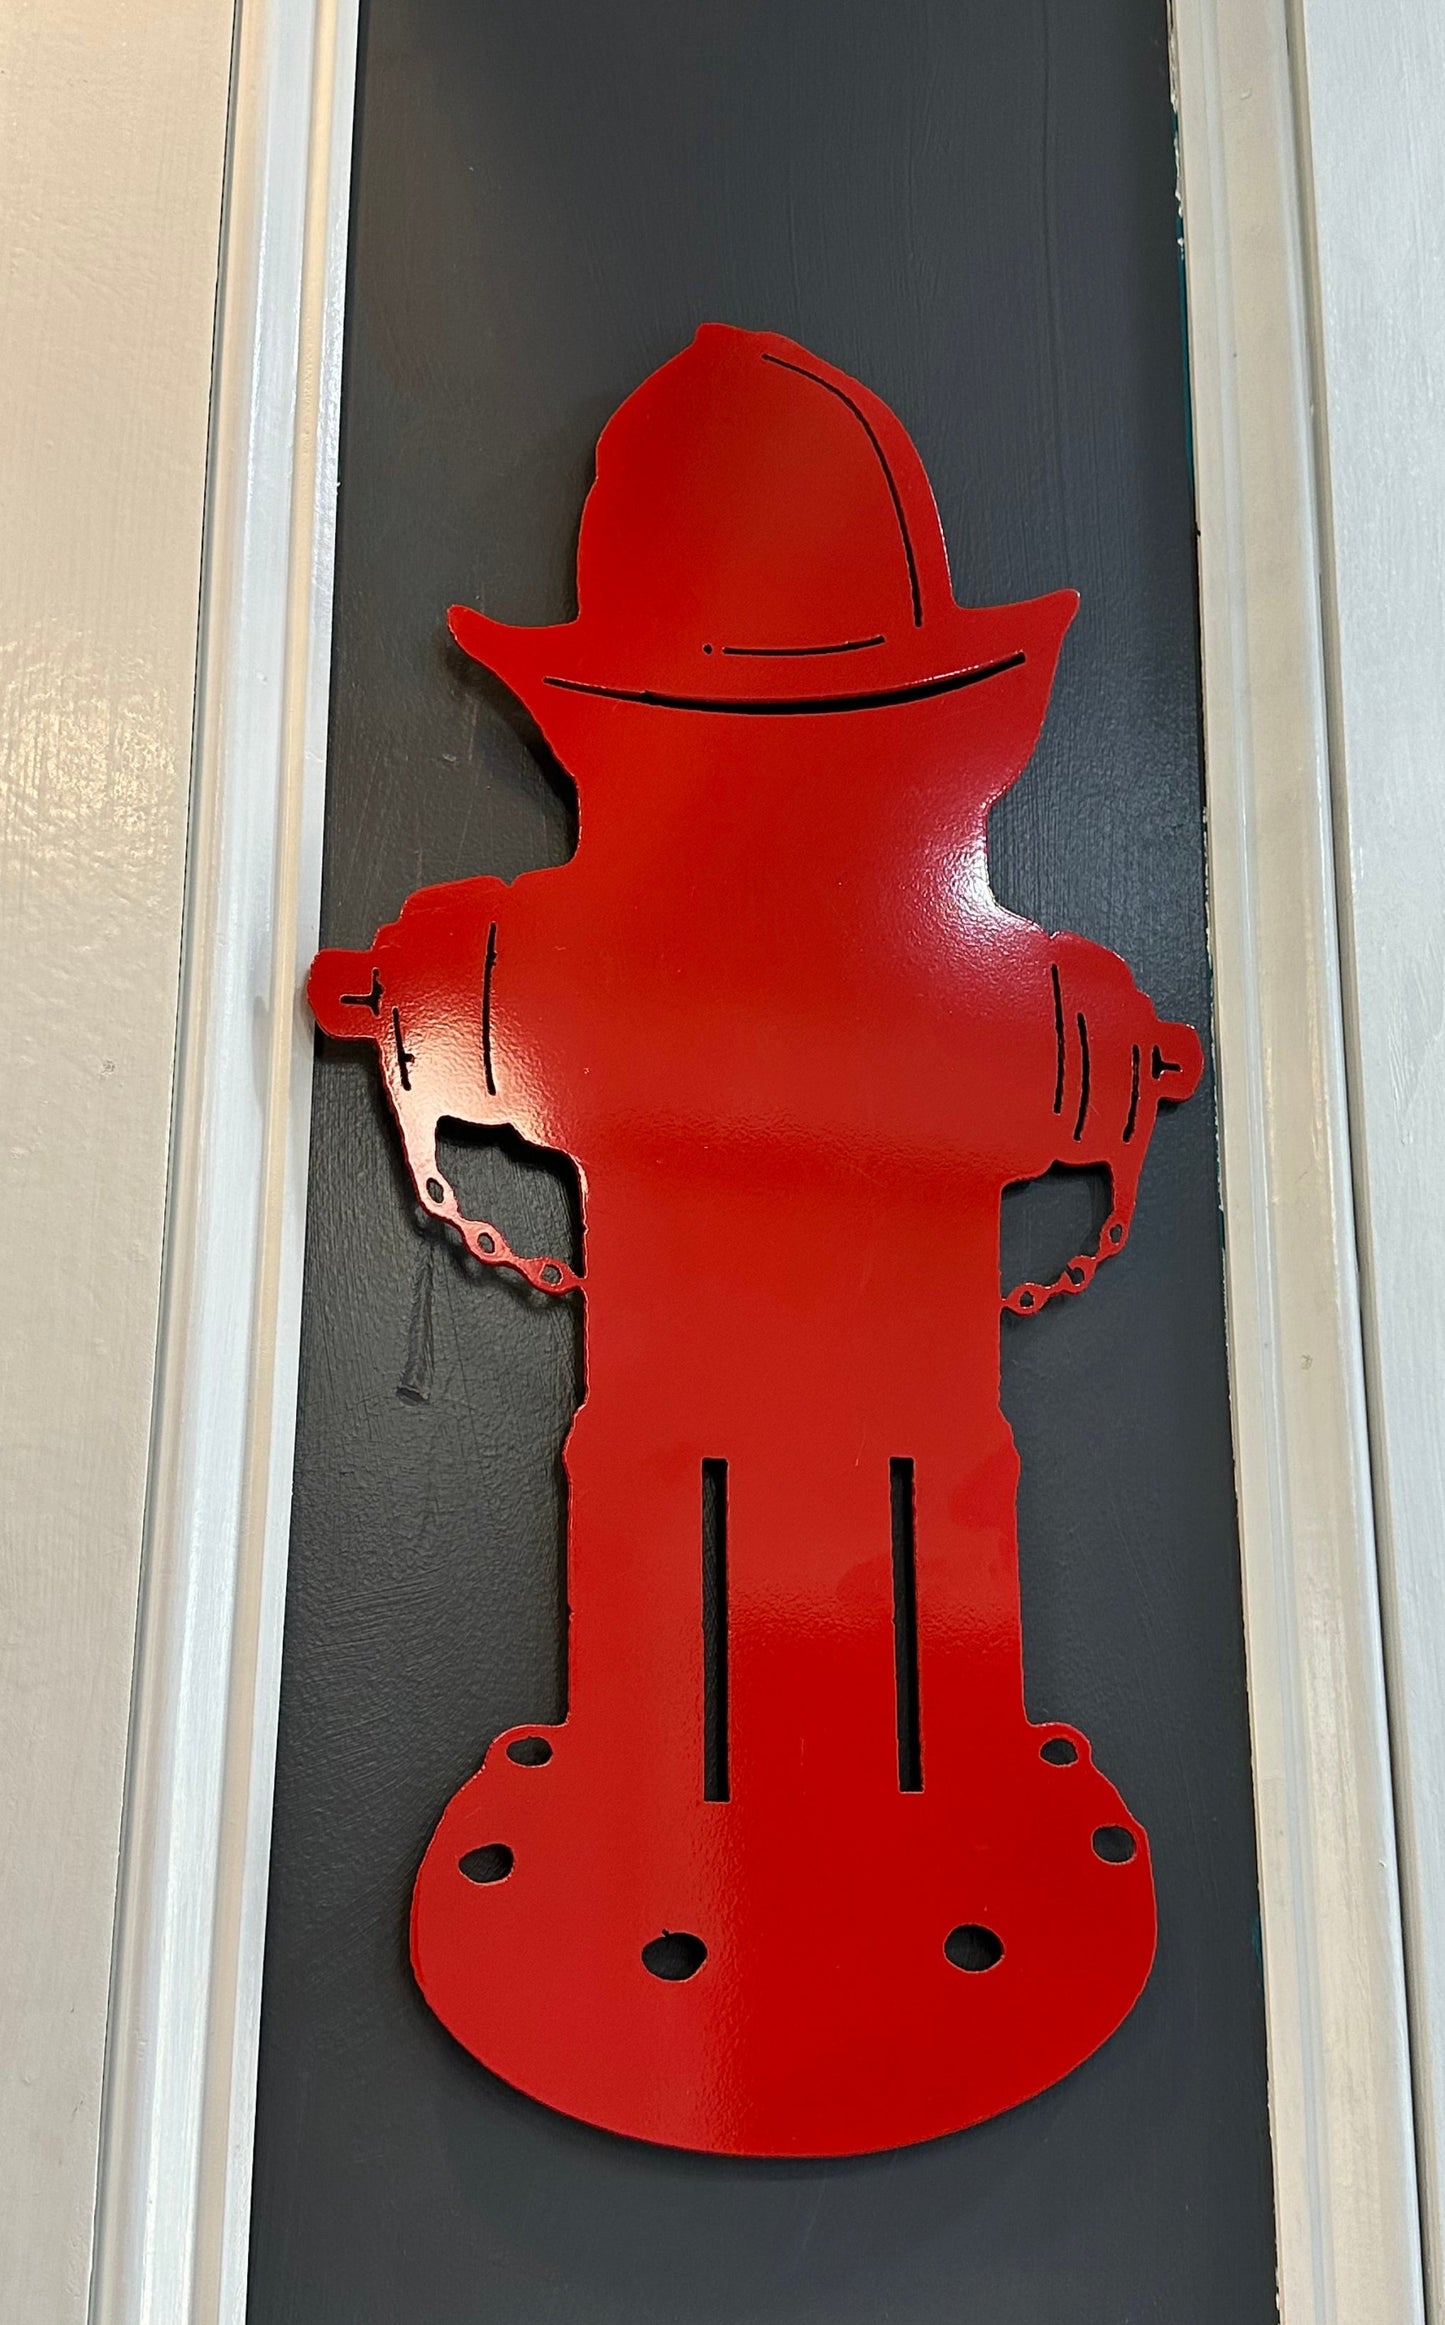 Metal Fire Hydrant- Hang or Stake in Ground- with or without custom message-19"H x10"W Powder Coated finish for Outdoors or Indoors